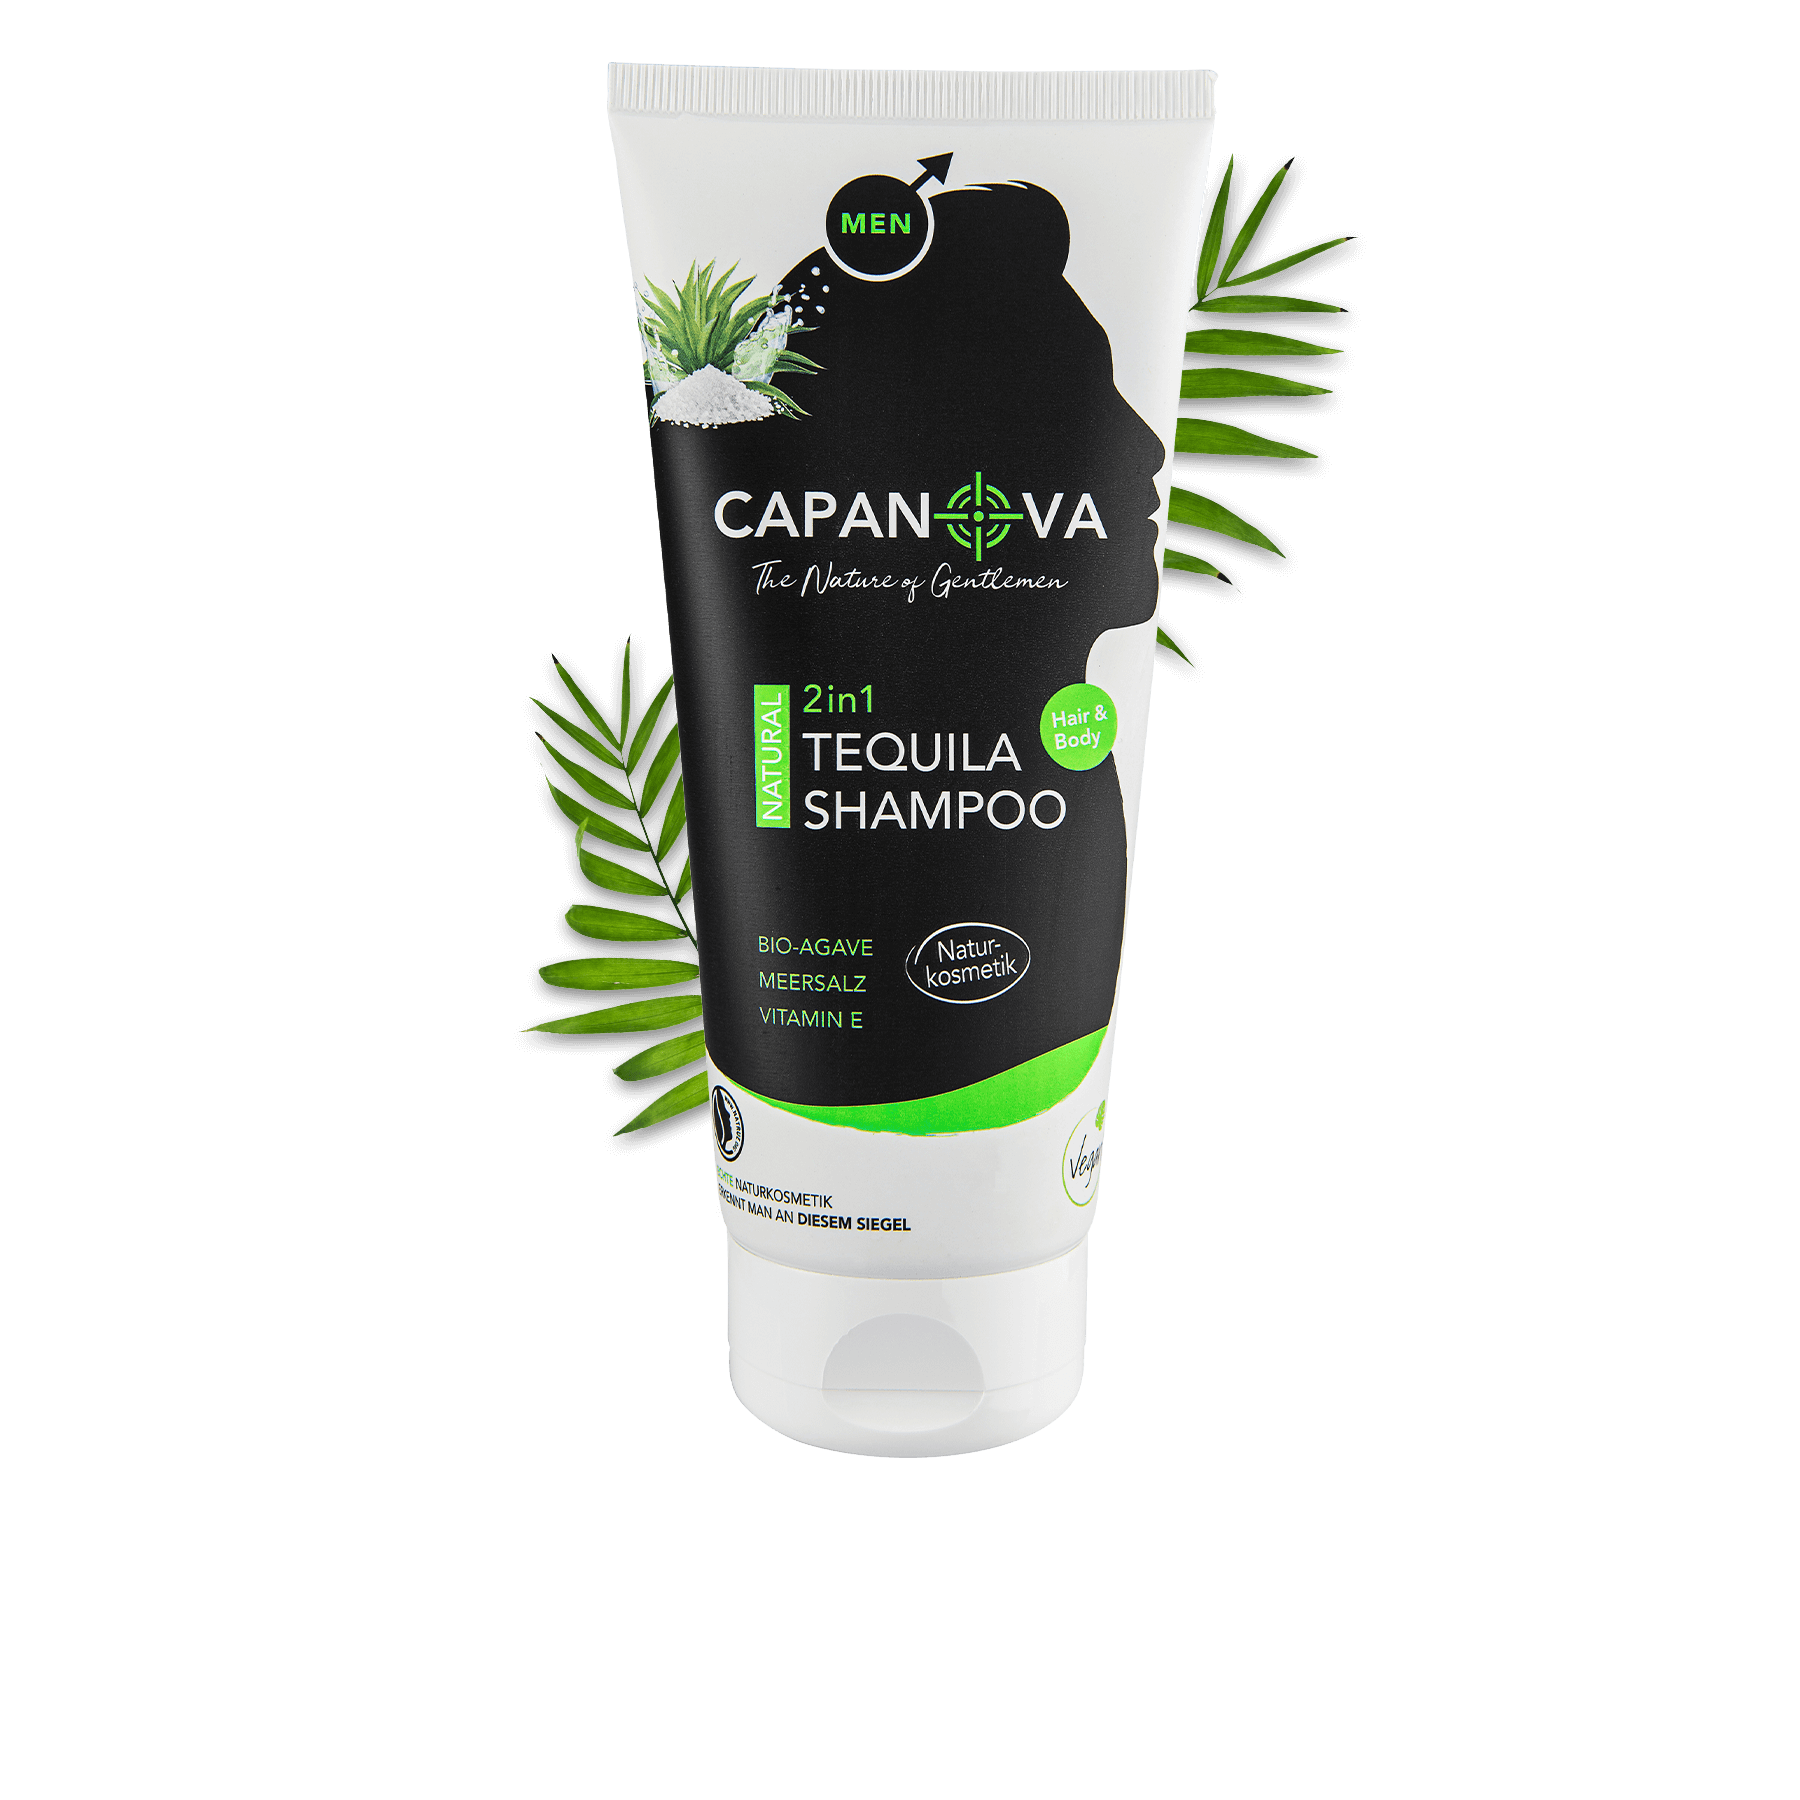 Natural 2in1 Tequila Shampoo